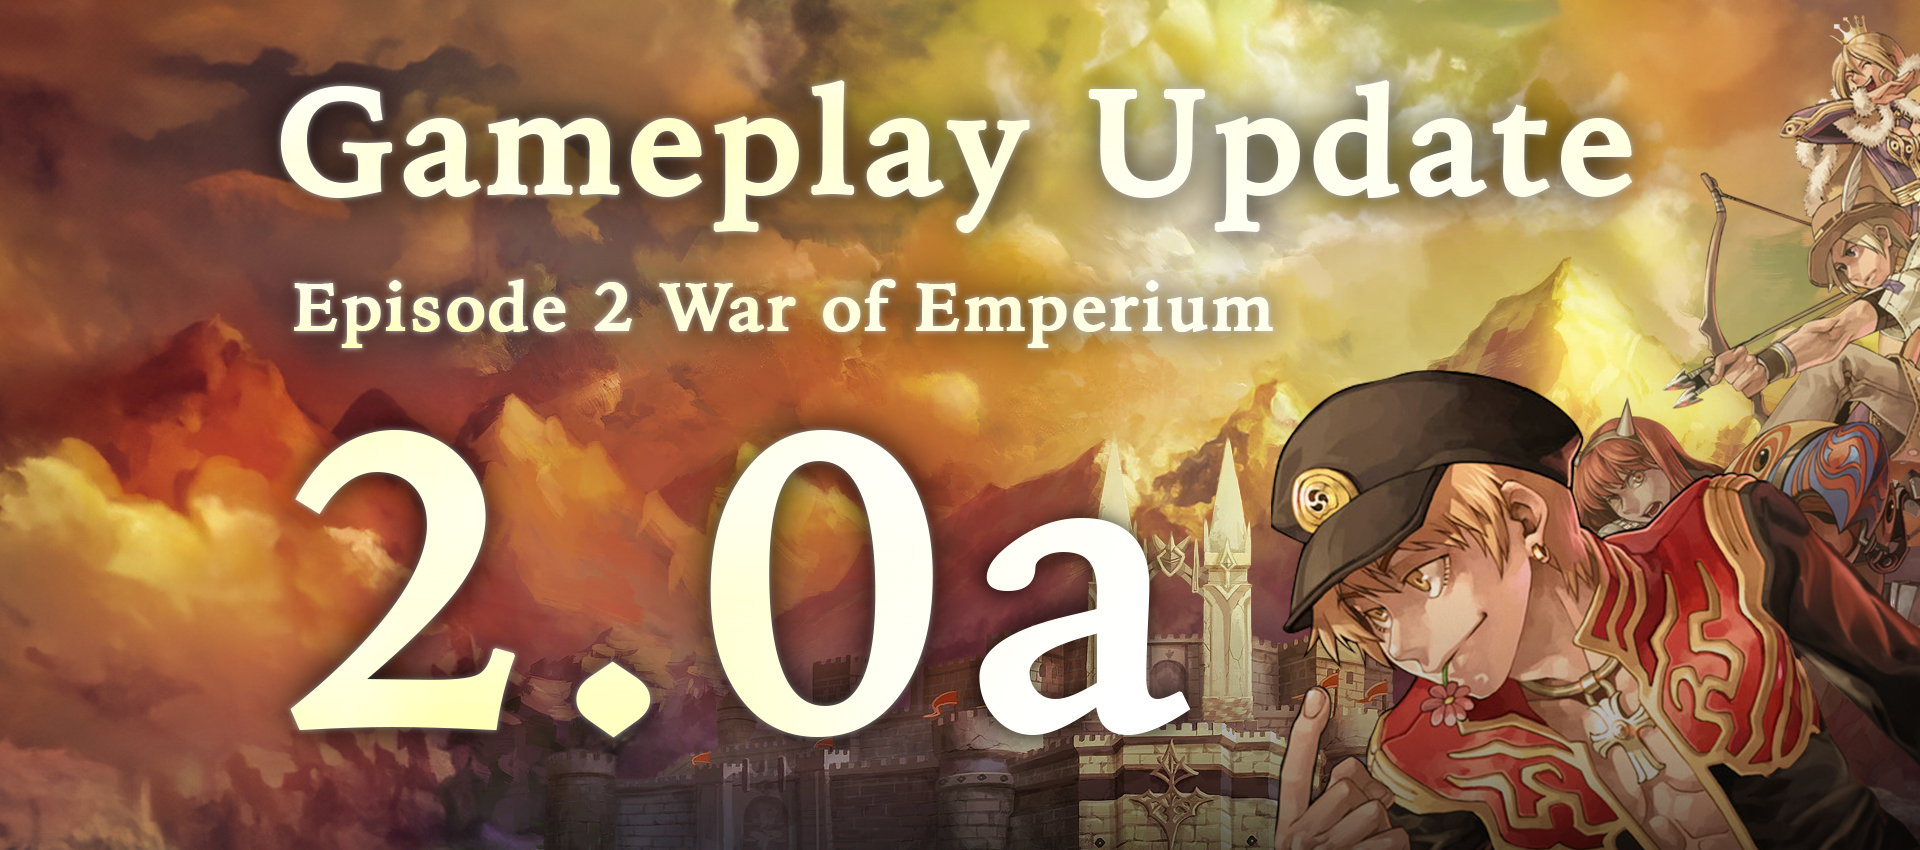 Gameplay Update 2.0a – The capital of the Arunafeltz